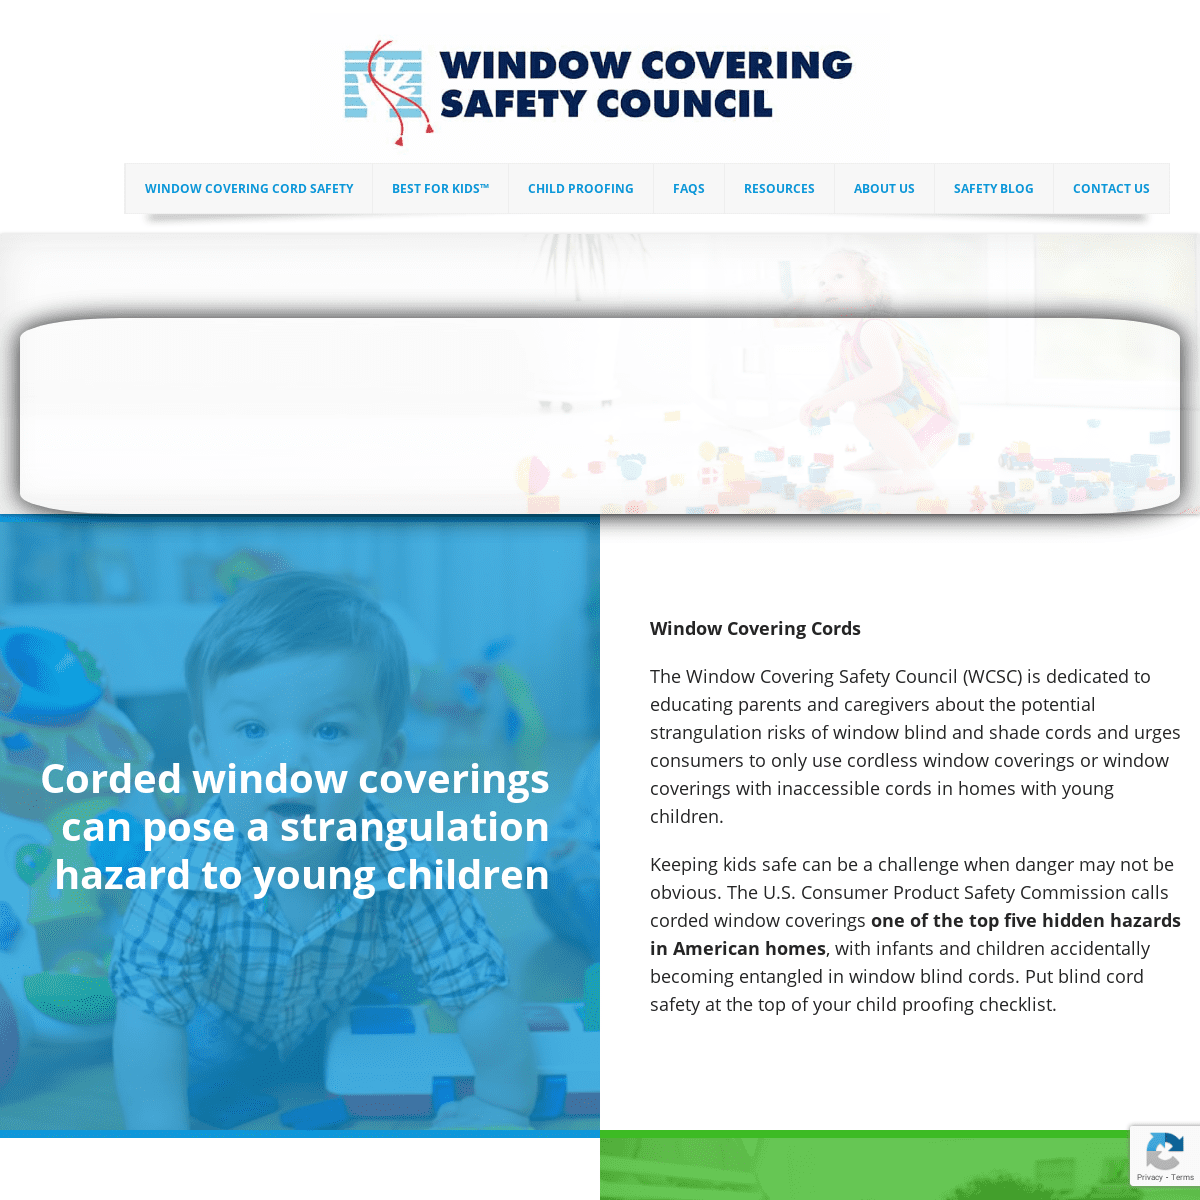 A complete backup of https://windowcoverings.org